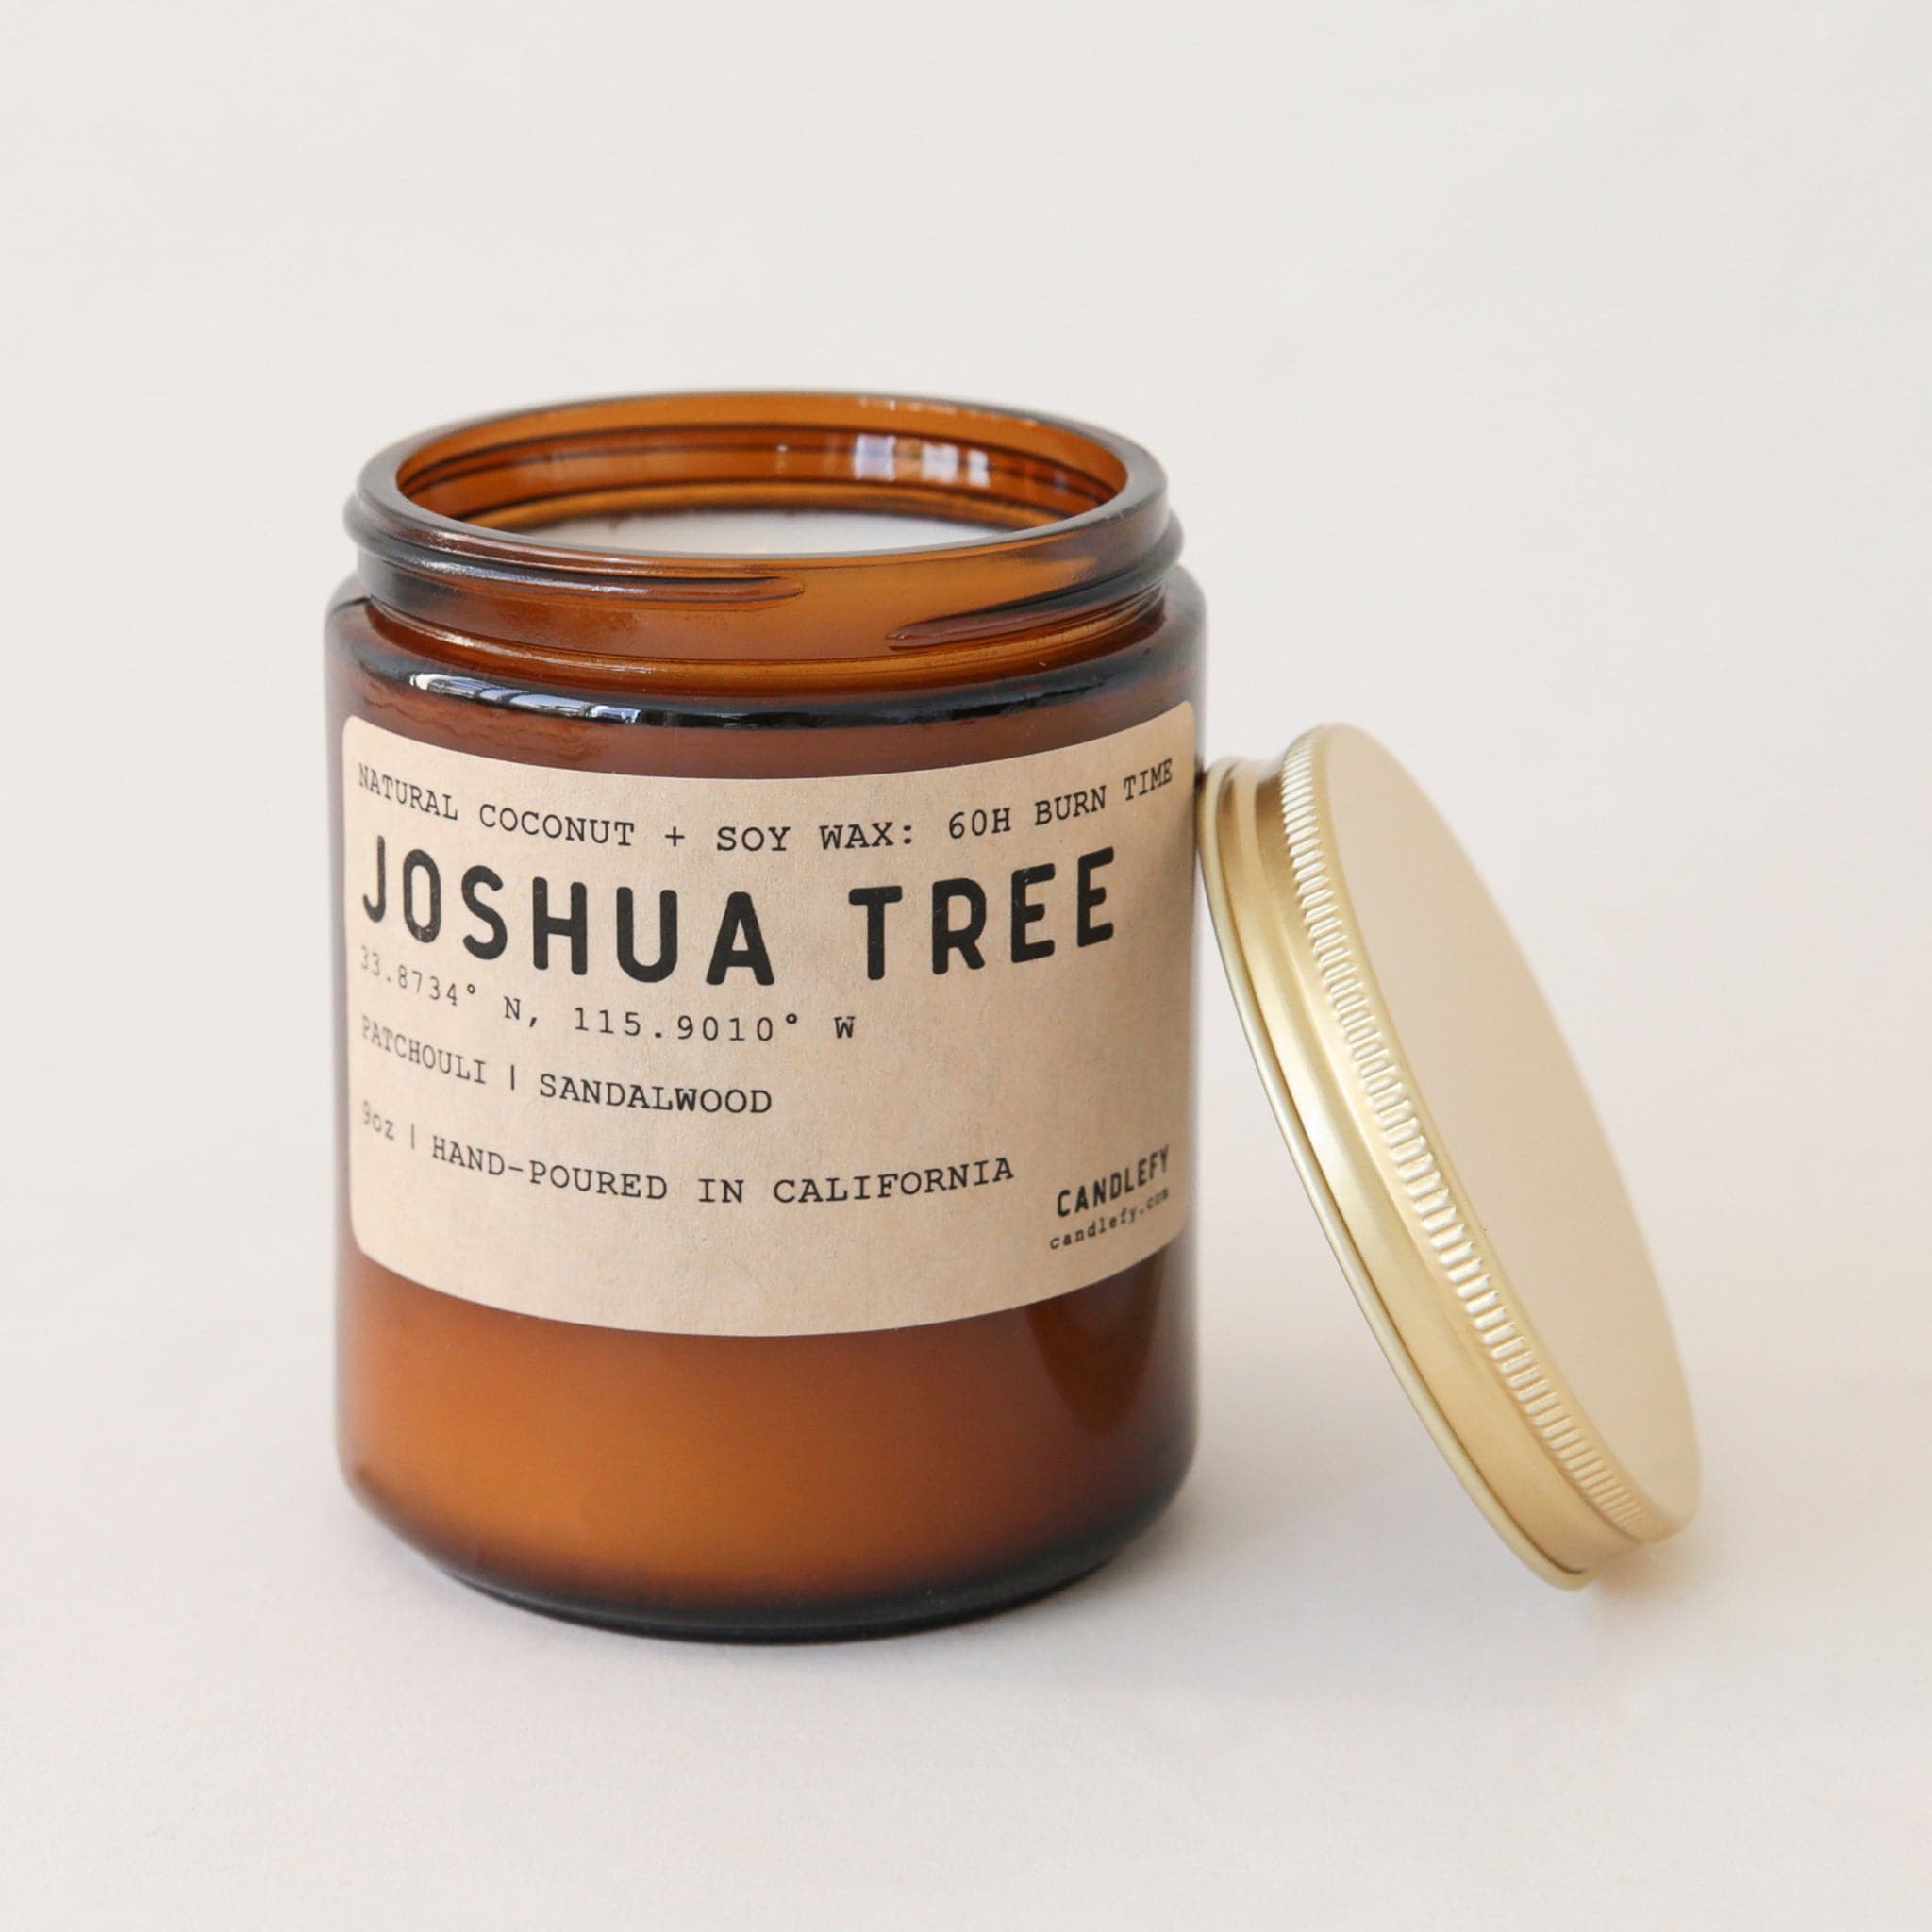 An amber colored glass candle jar with a brown label on the front that reads, "Joshua Tree Patchouli | Sandalwood" in black letter along with a single wick candle inside the jar and a gold screw on lid. 